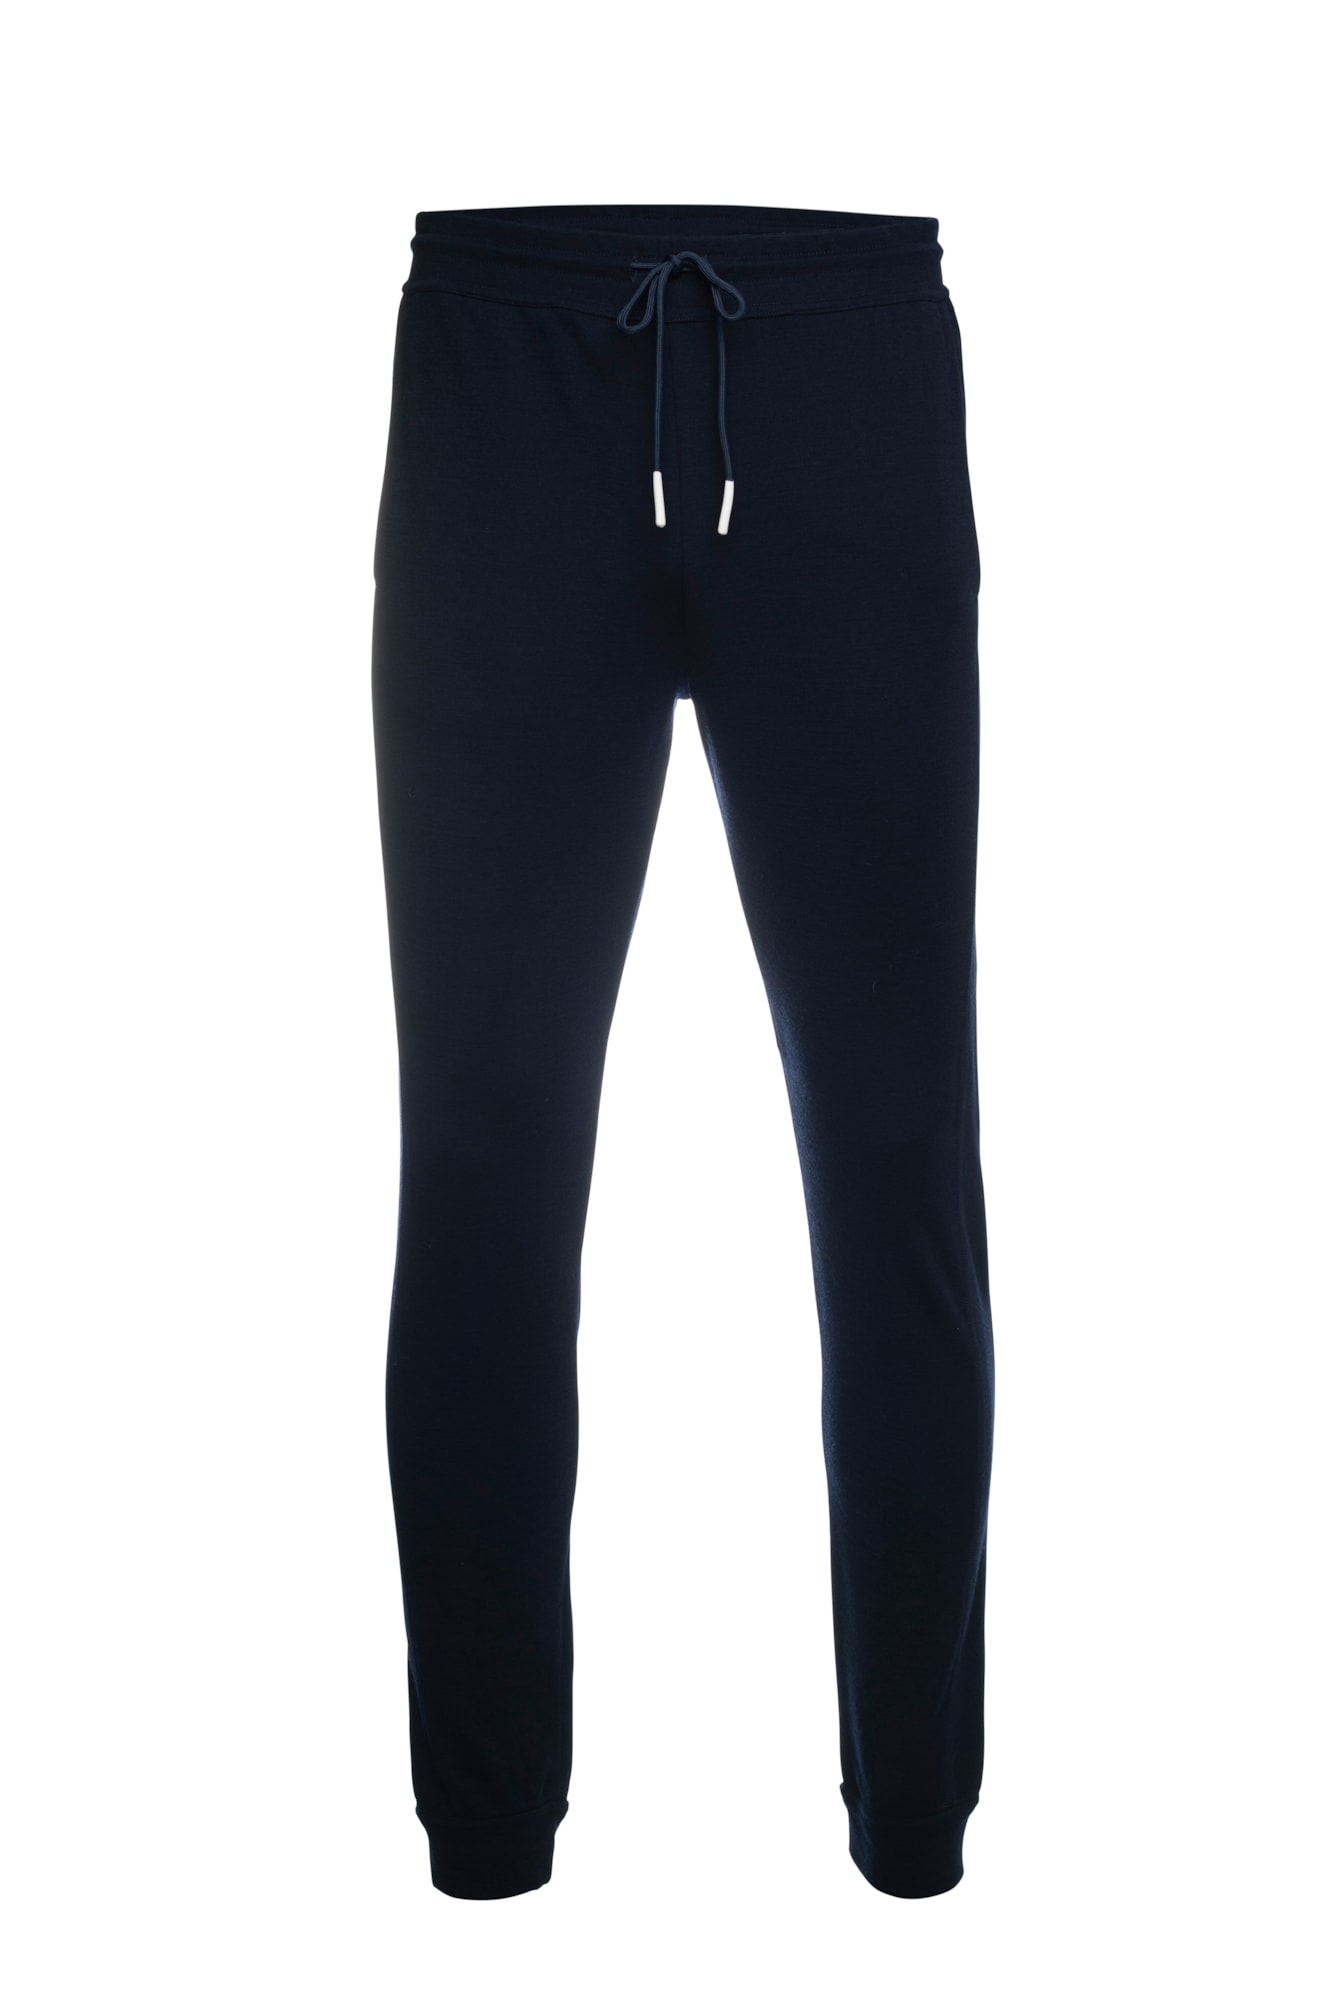 Tindefjell Basic pants - Men - Navy - Dale of Norway - Dale of Norway